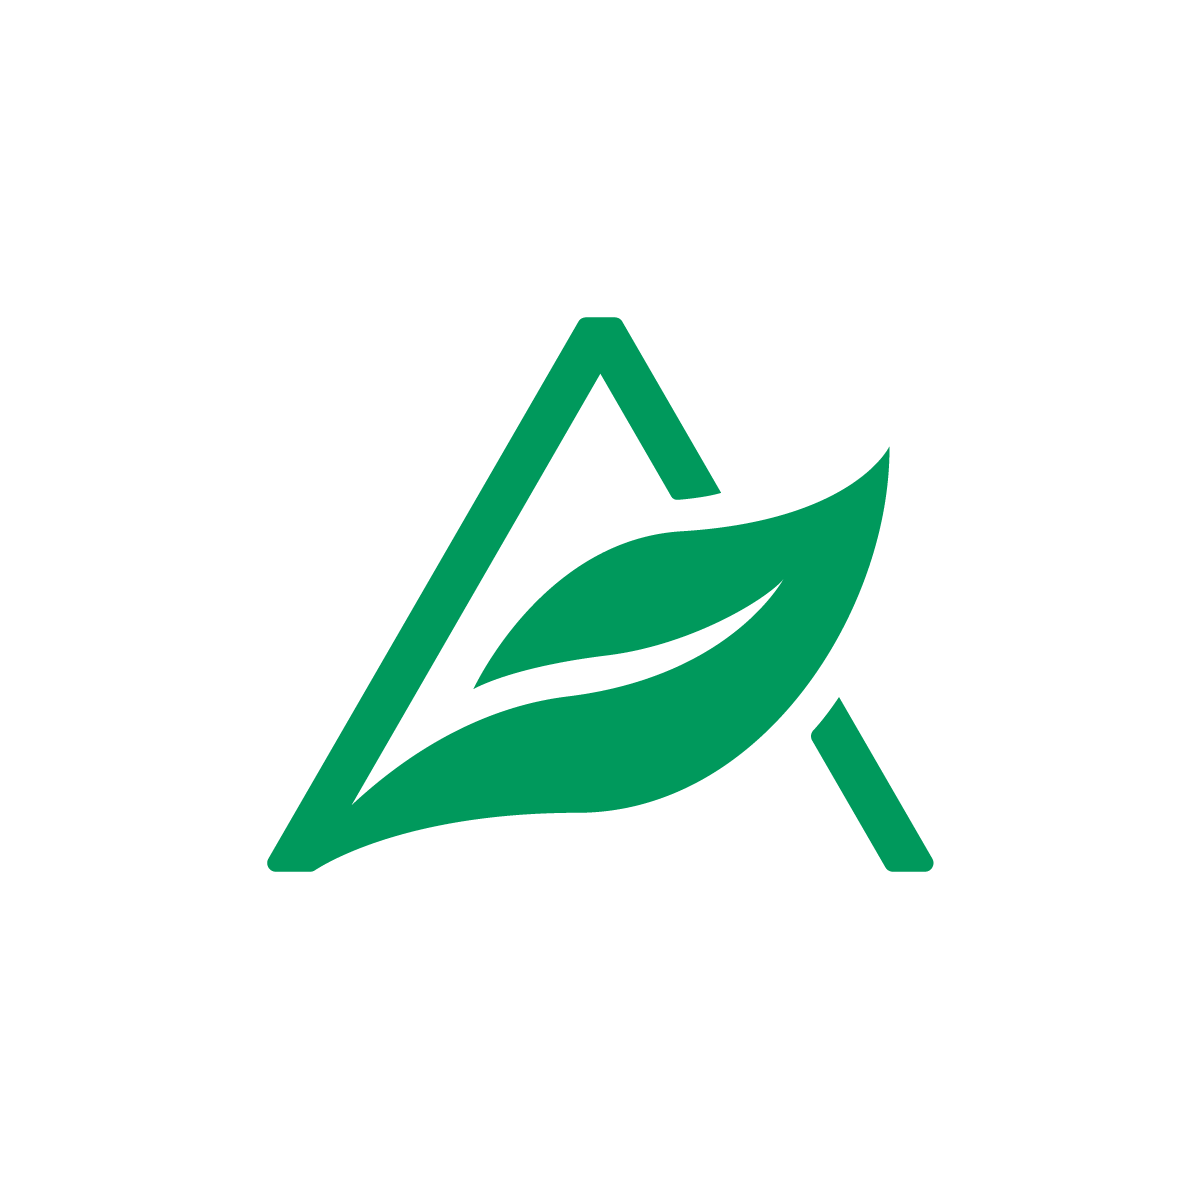 Leaf Letter A Logo blends 'A' and a leaf with triangles, symbolizing creativity and eco-friendliness, ideal for sustainable brands.